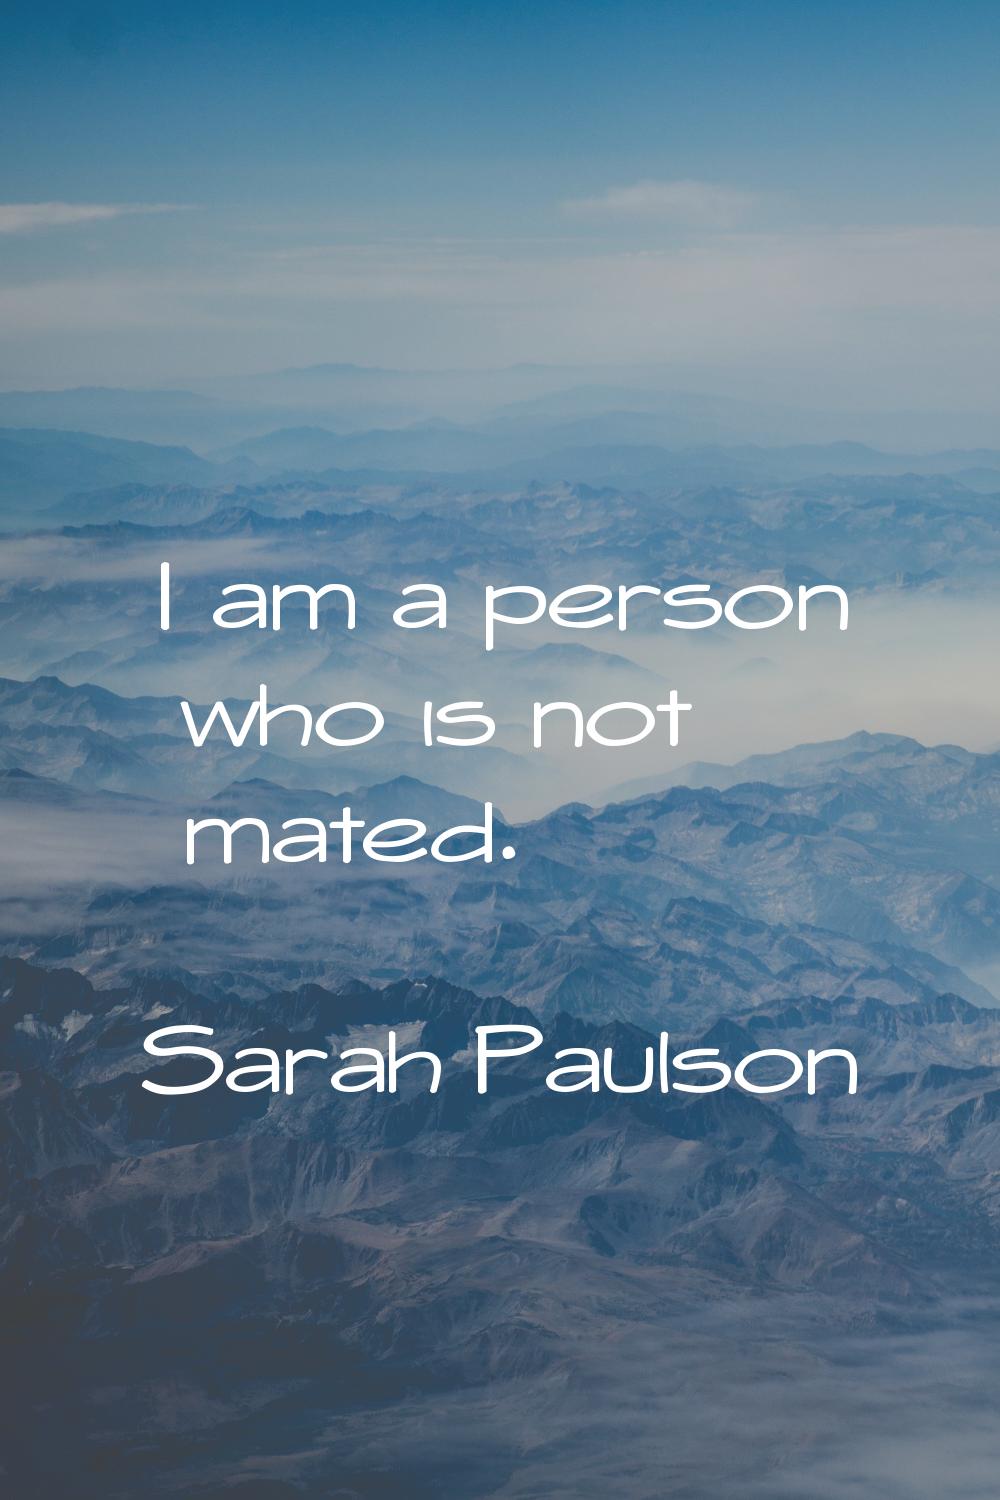 I am a person who is not mated.